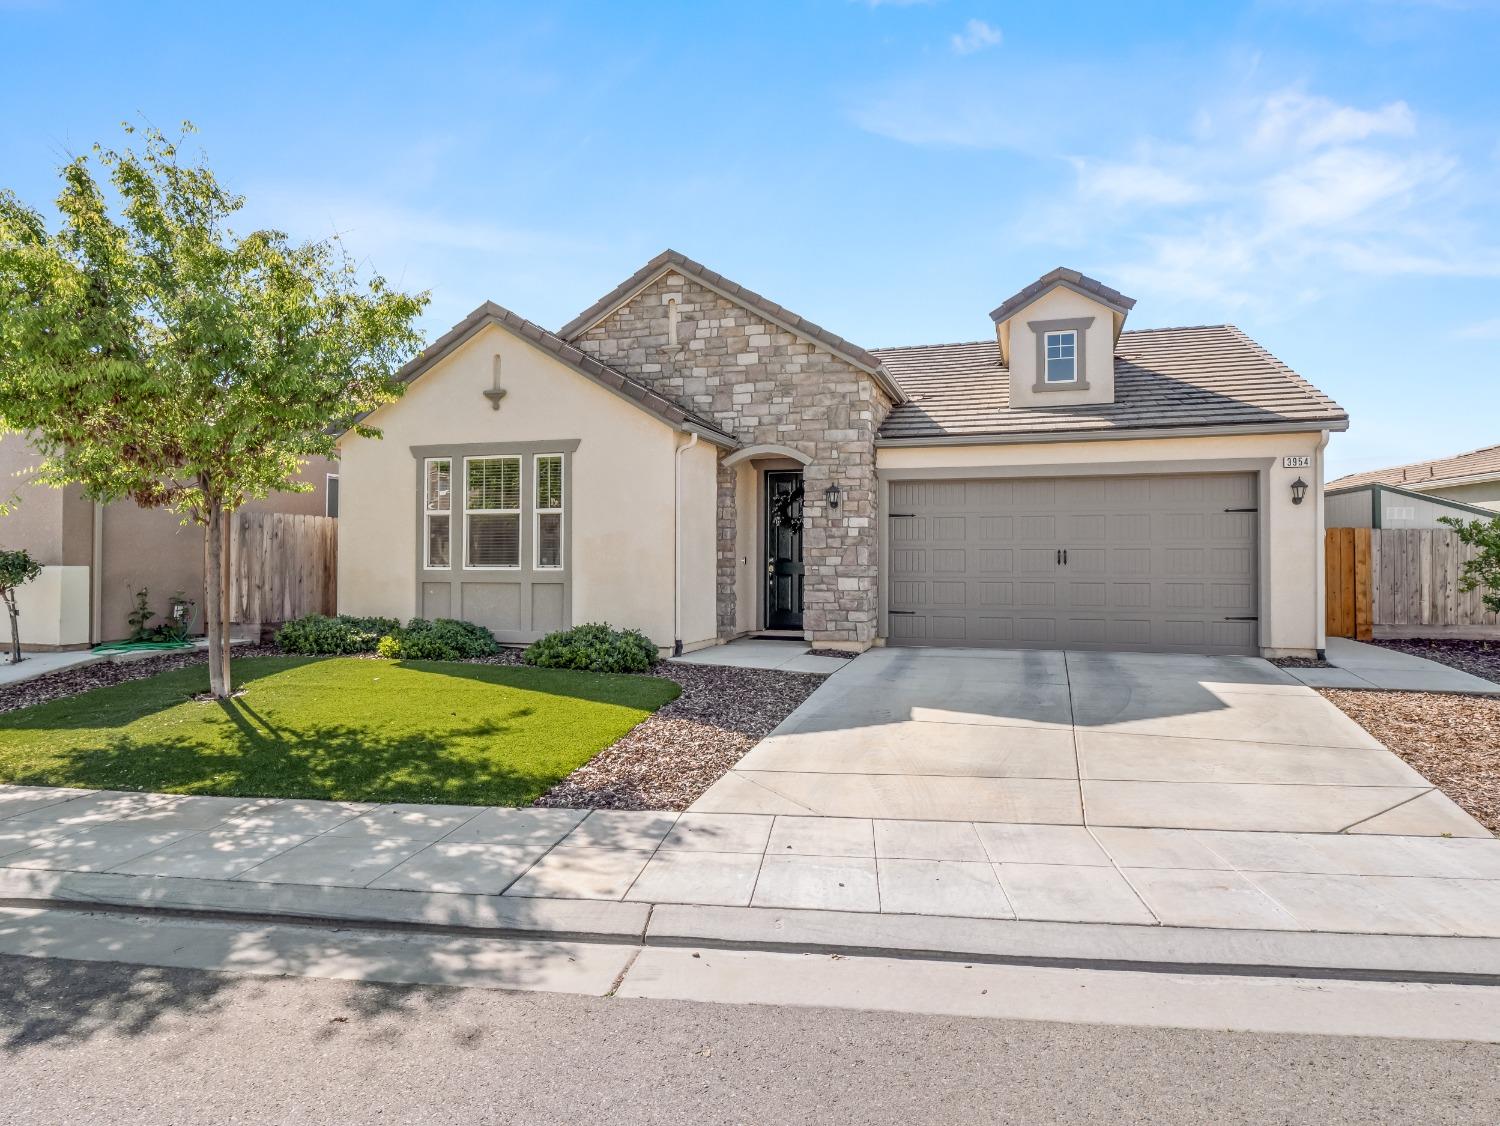 Photo of 3954 Griffith Ave in Clovis, CA